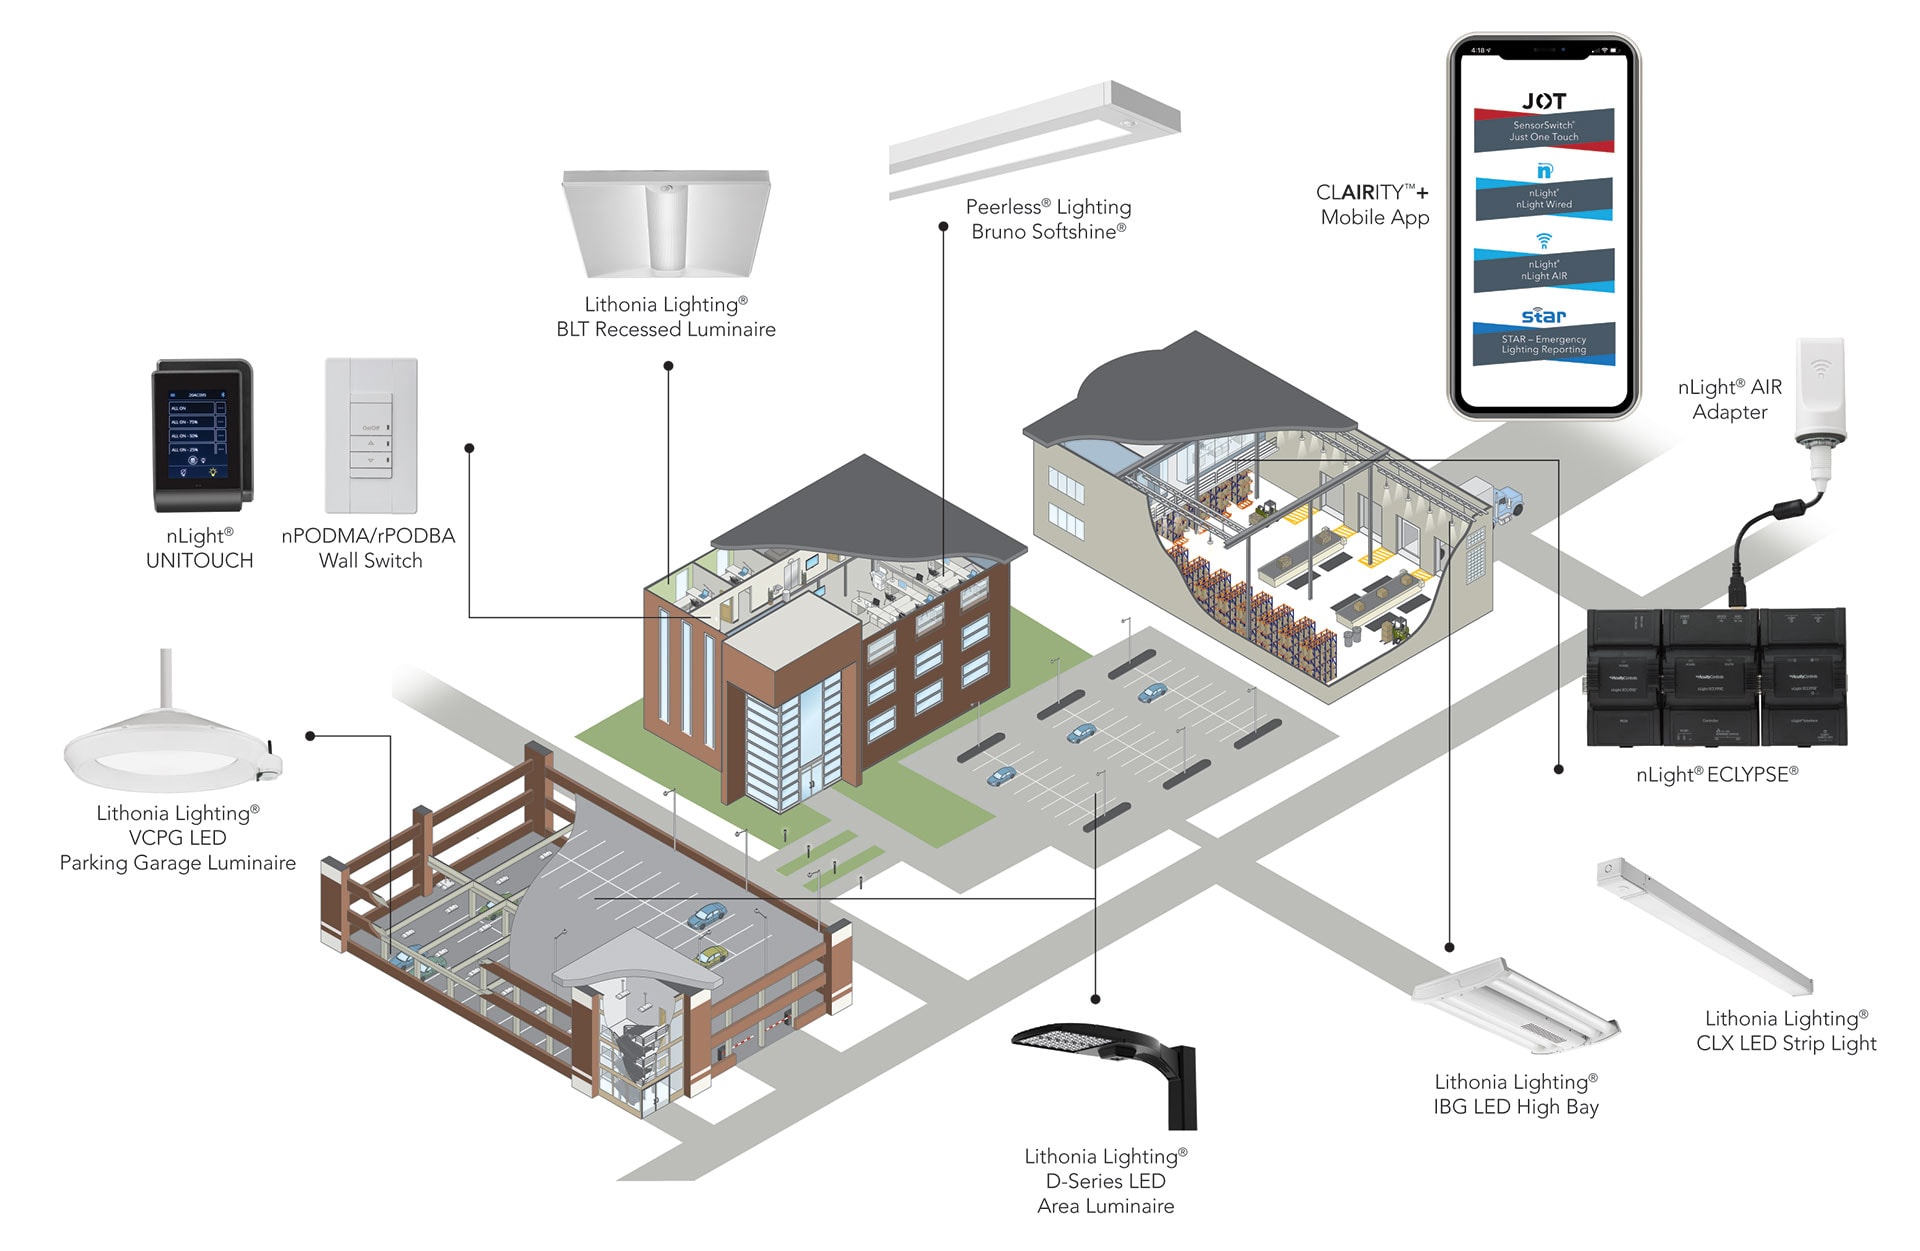 A drawing showing that nLight lighting controls can be utilized in just one room or an entire campus - including parking decks, residential halls, and academic buildings.